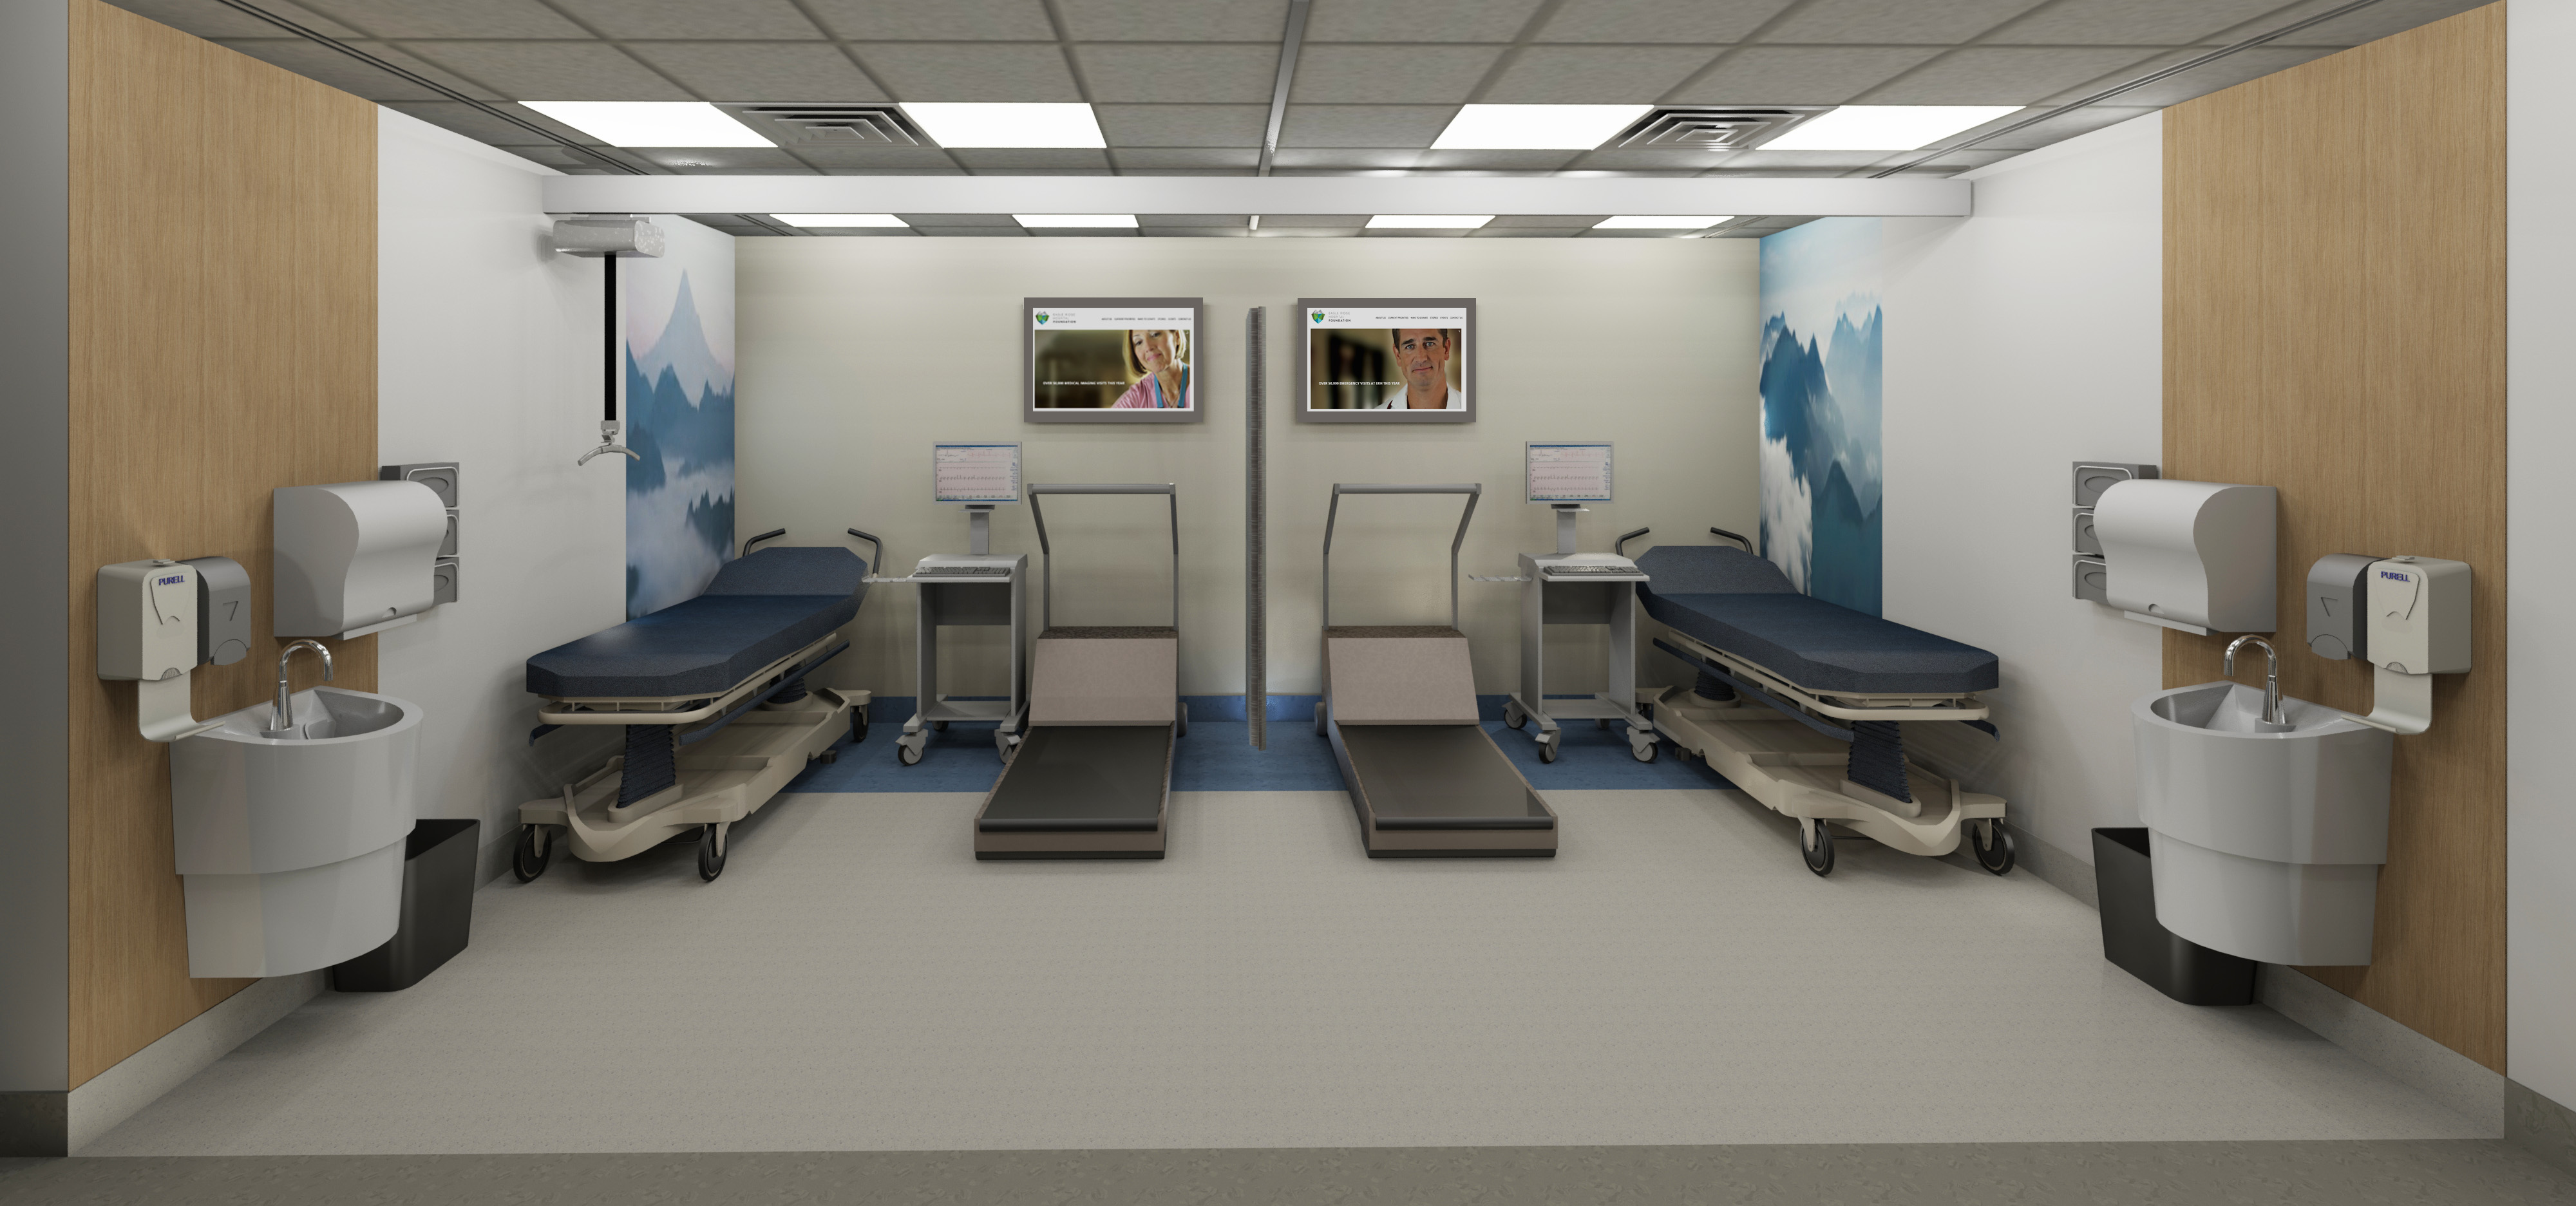 Concept rendering of a stress testing room in the new emergency department. Designs may be subject to change. 